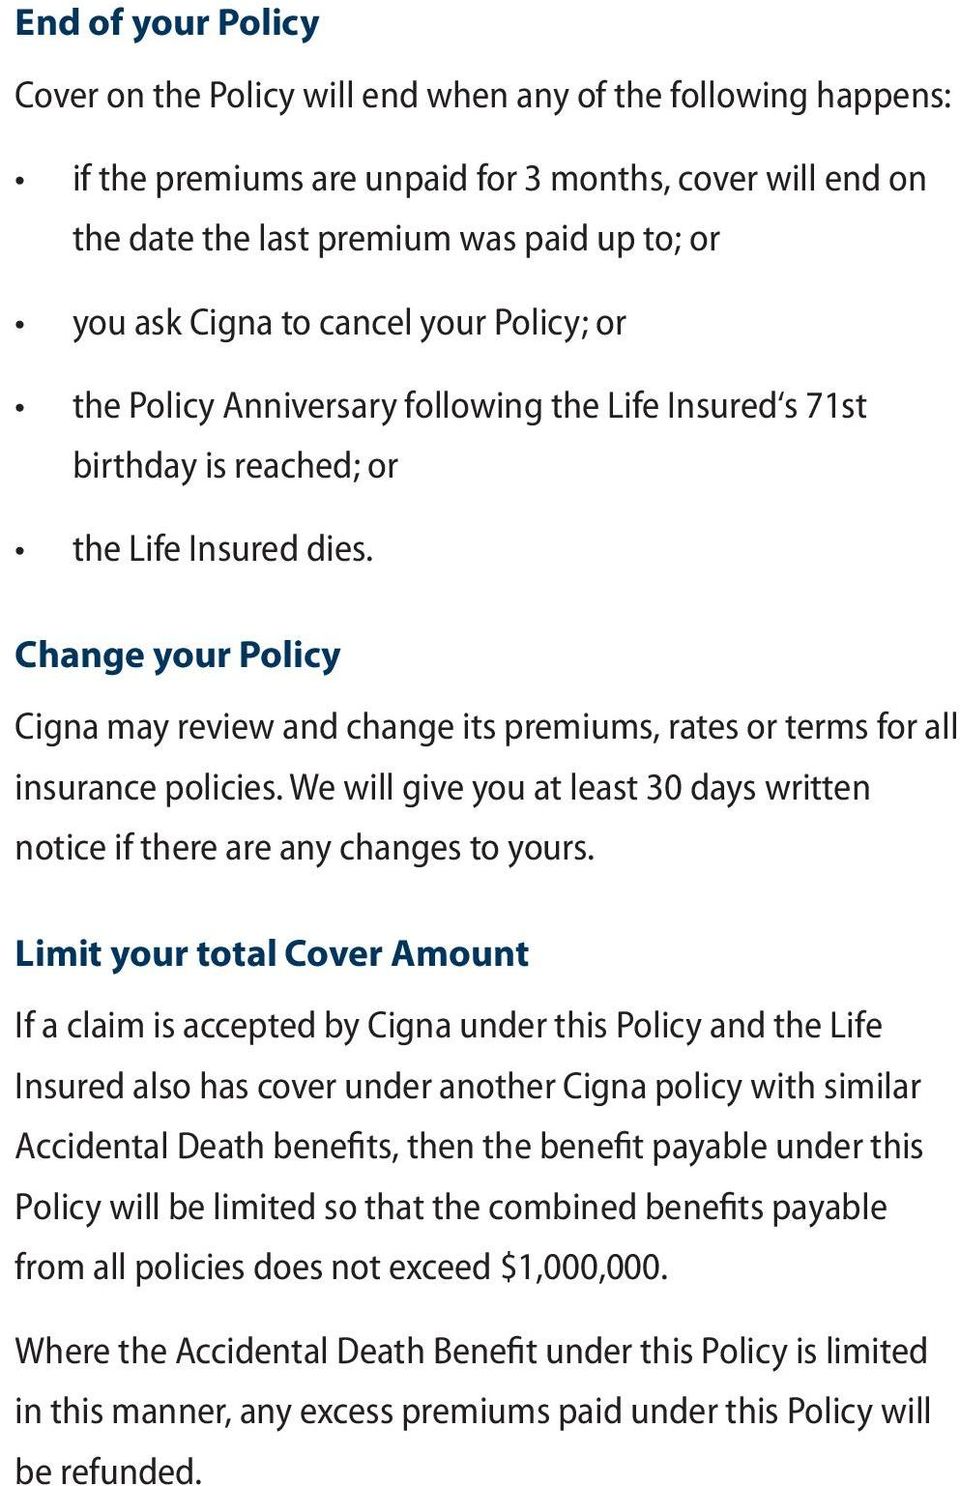 Change your Policy Cigna may review and change its premiums, rates or terms for all insurance policies. We will give you at least 30 days written notice if there are any changes to yours.